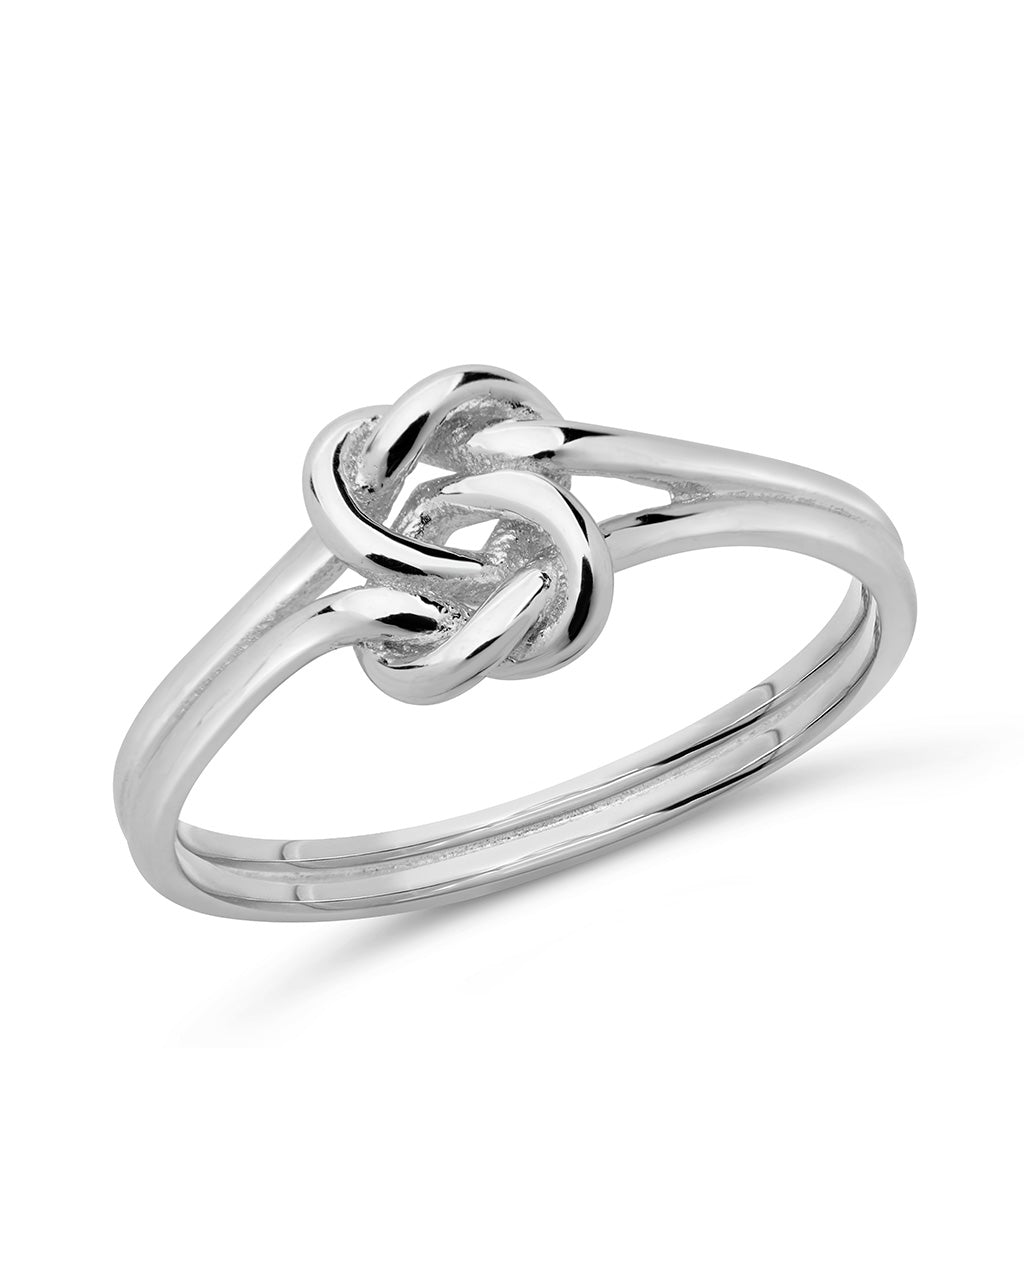 Sterling Silver Intricate Knot Ring Ring Sterling Forever Silver 6 